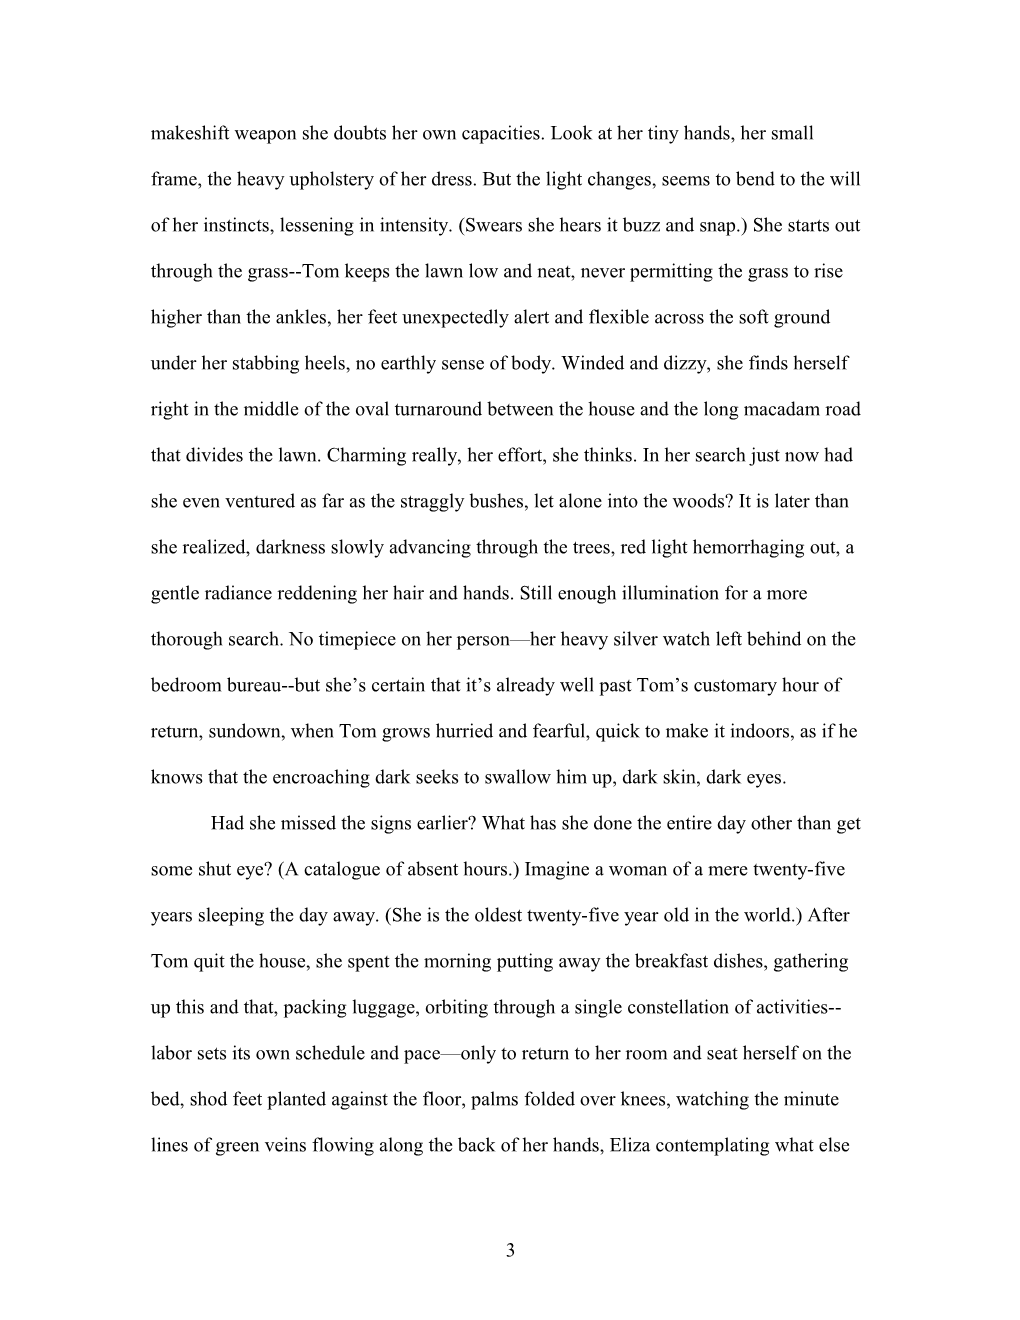 Manuscript Draft of Chapter One